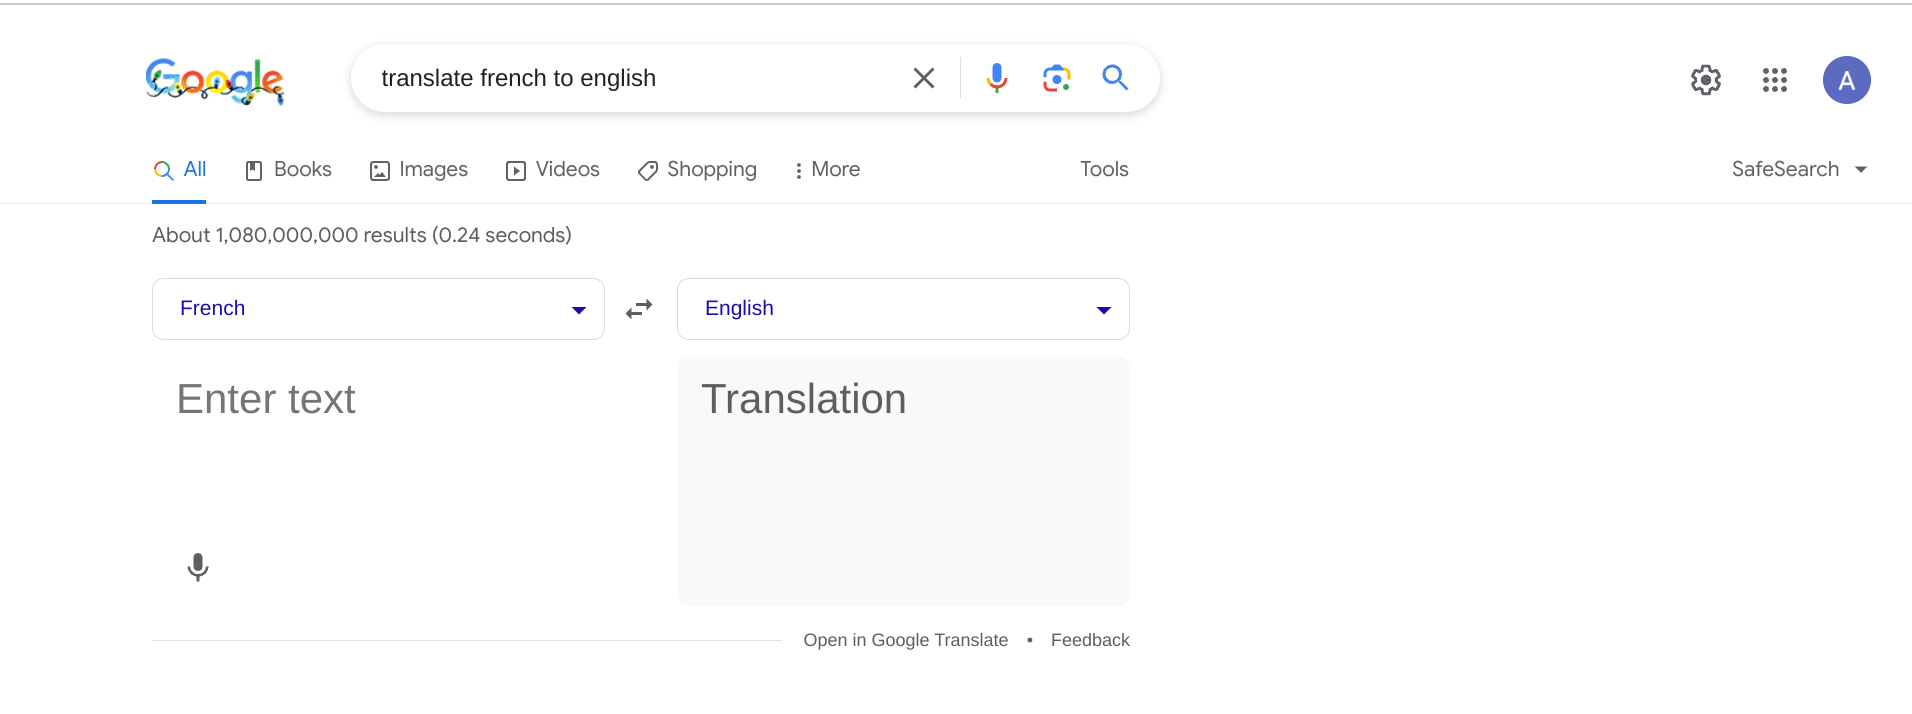 A screenshot of a Google search for French to English translation as an example of translation services number 65 on our list of backyard business ideas